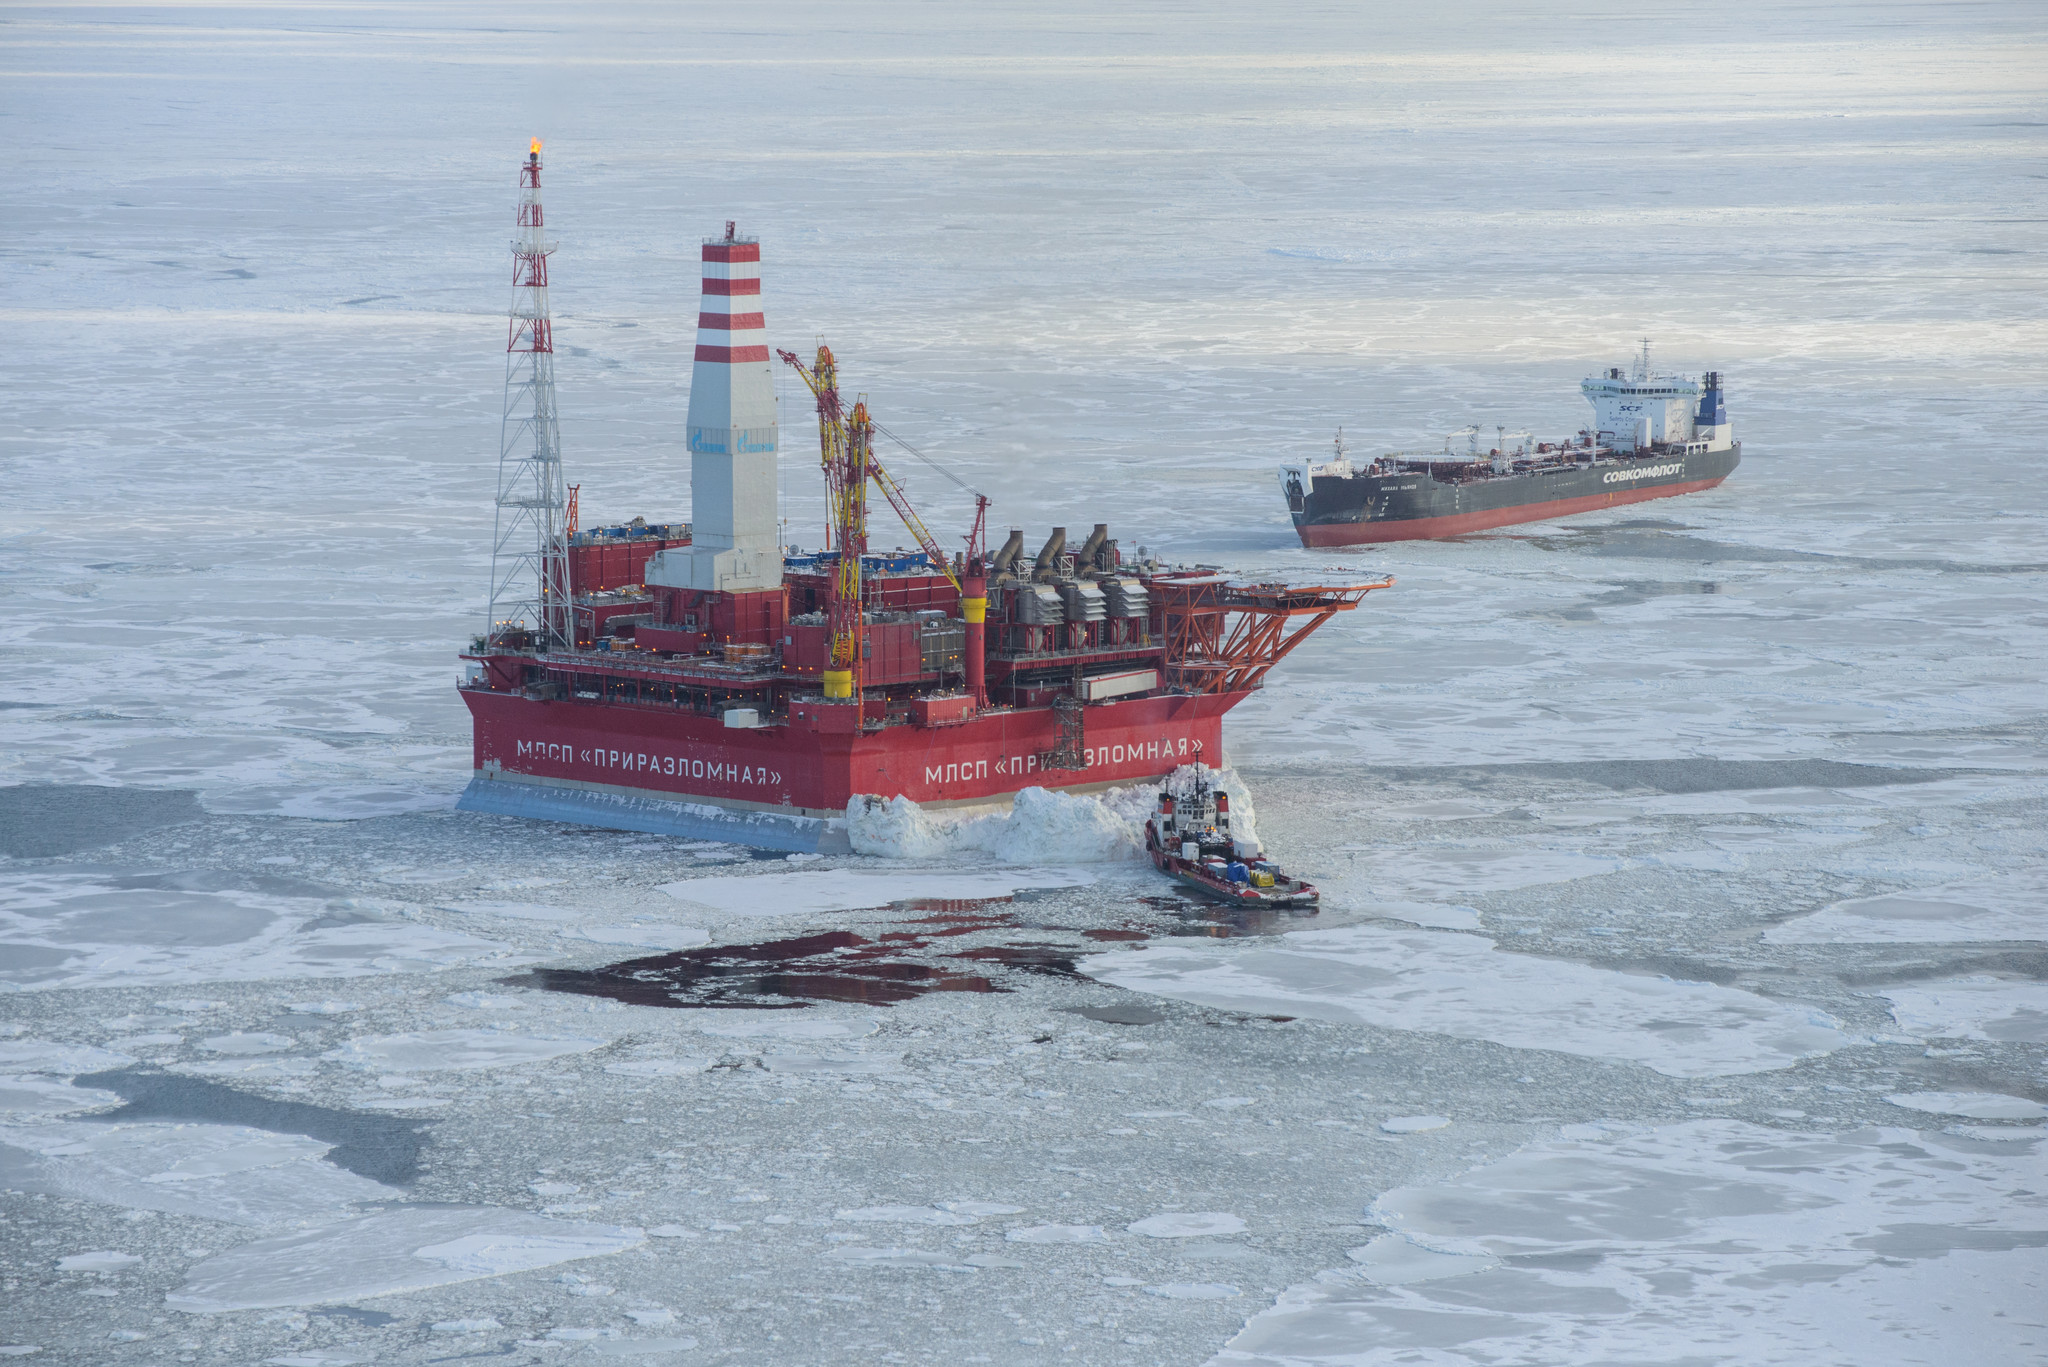 A Gazprom oil production platform in the Arctic. Severe climatic conditions and remoteness drive up the cost of Russian oil. (Image: Gazprom)